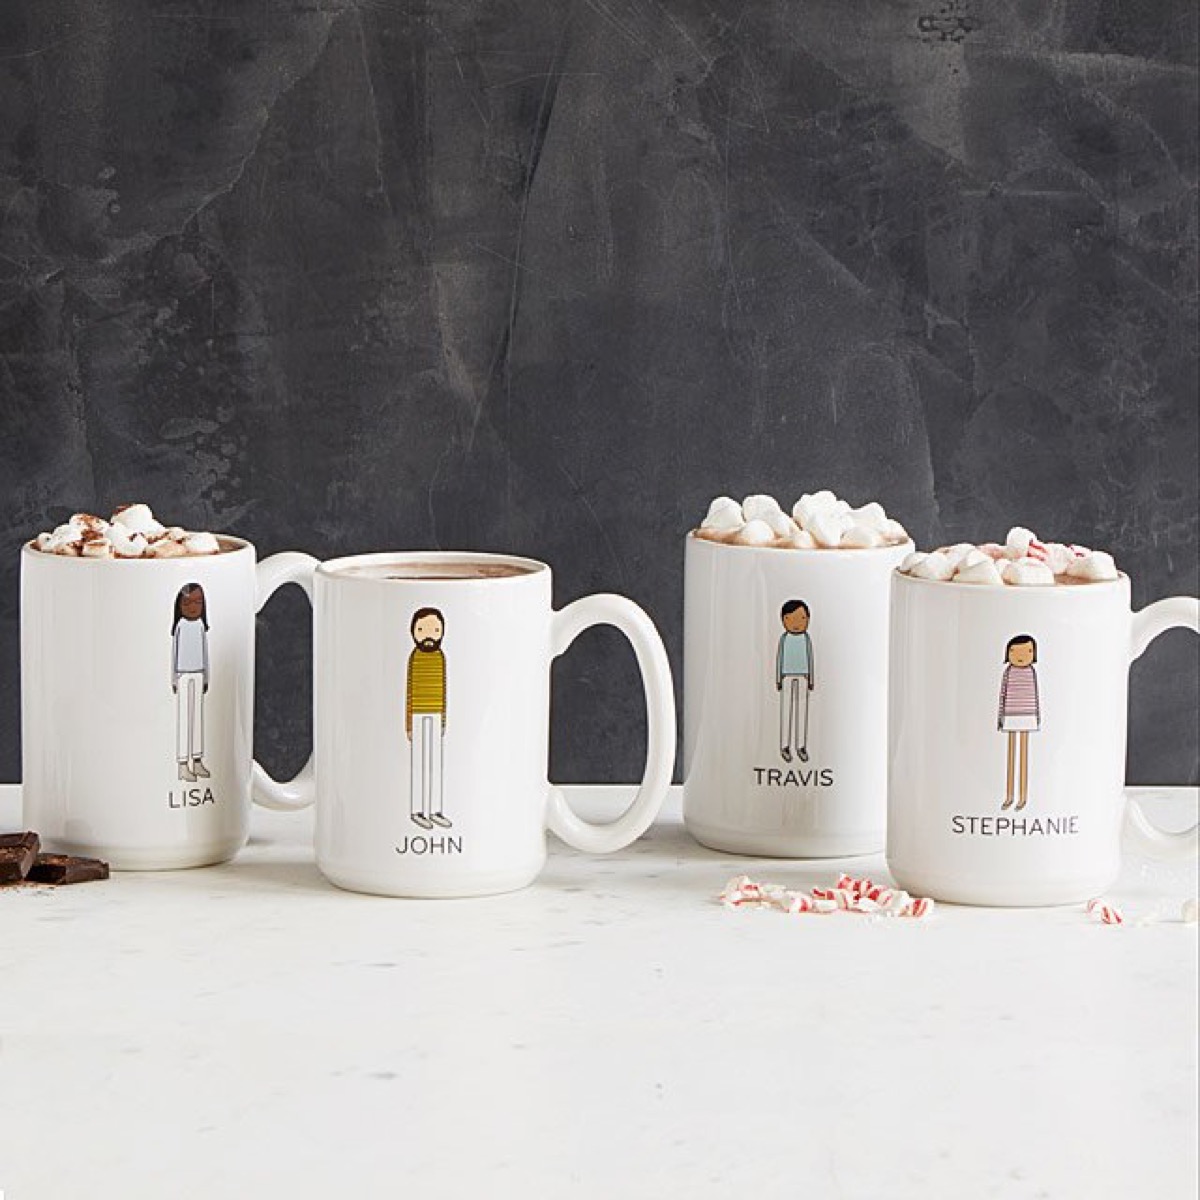 Four family member mugs with hot chocolate